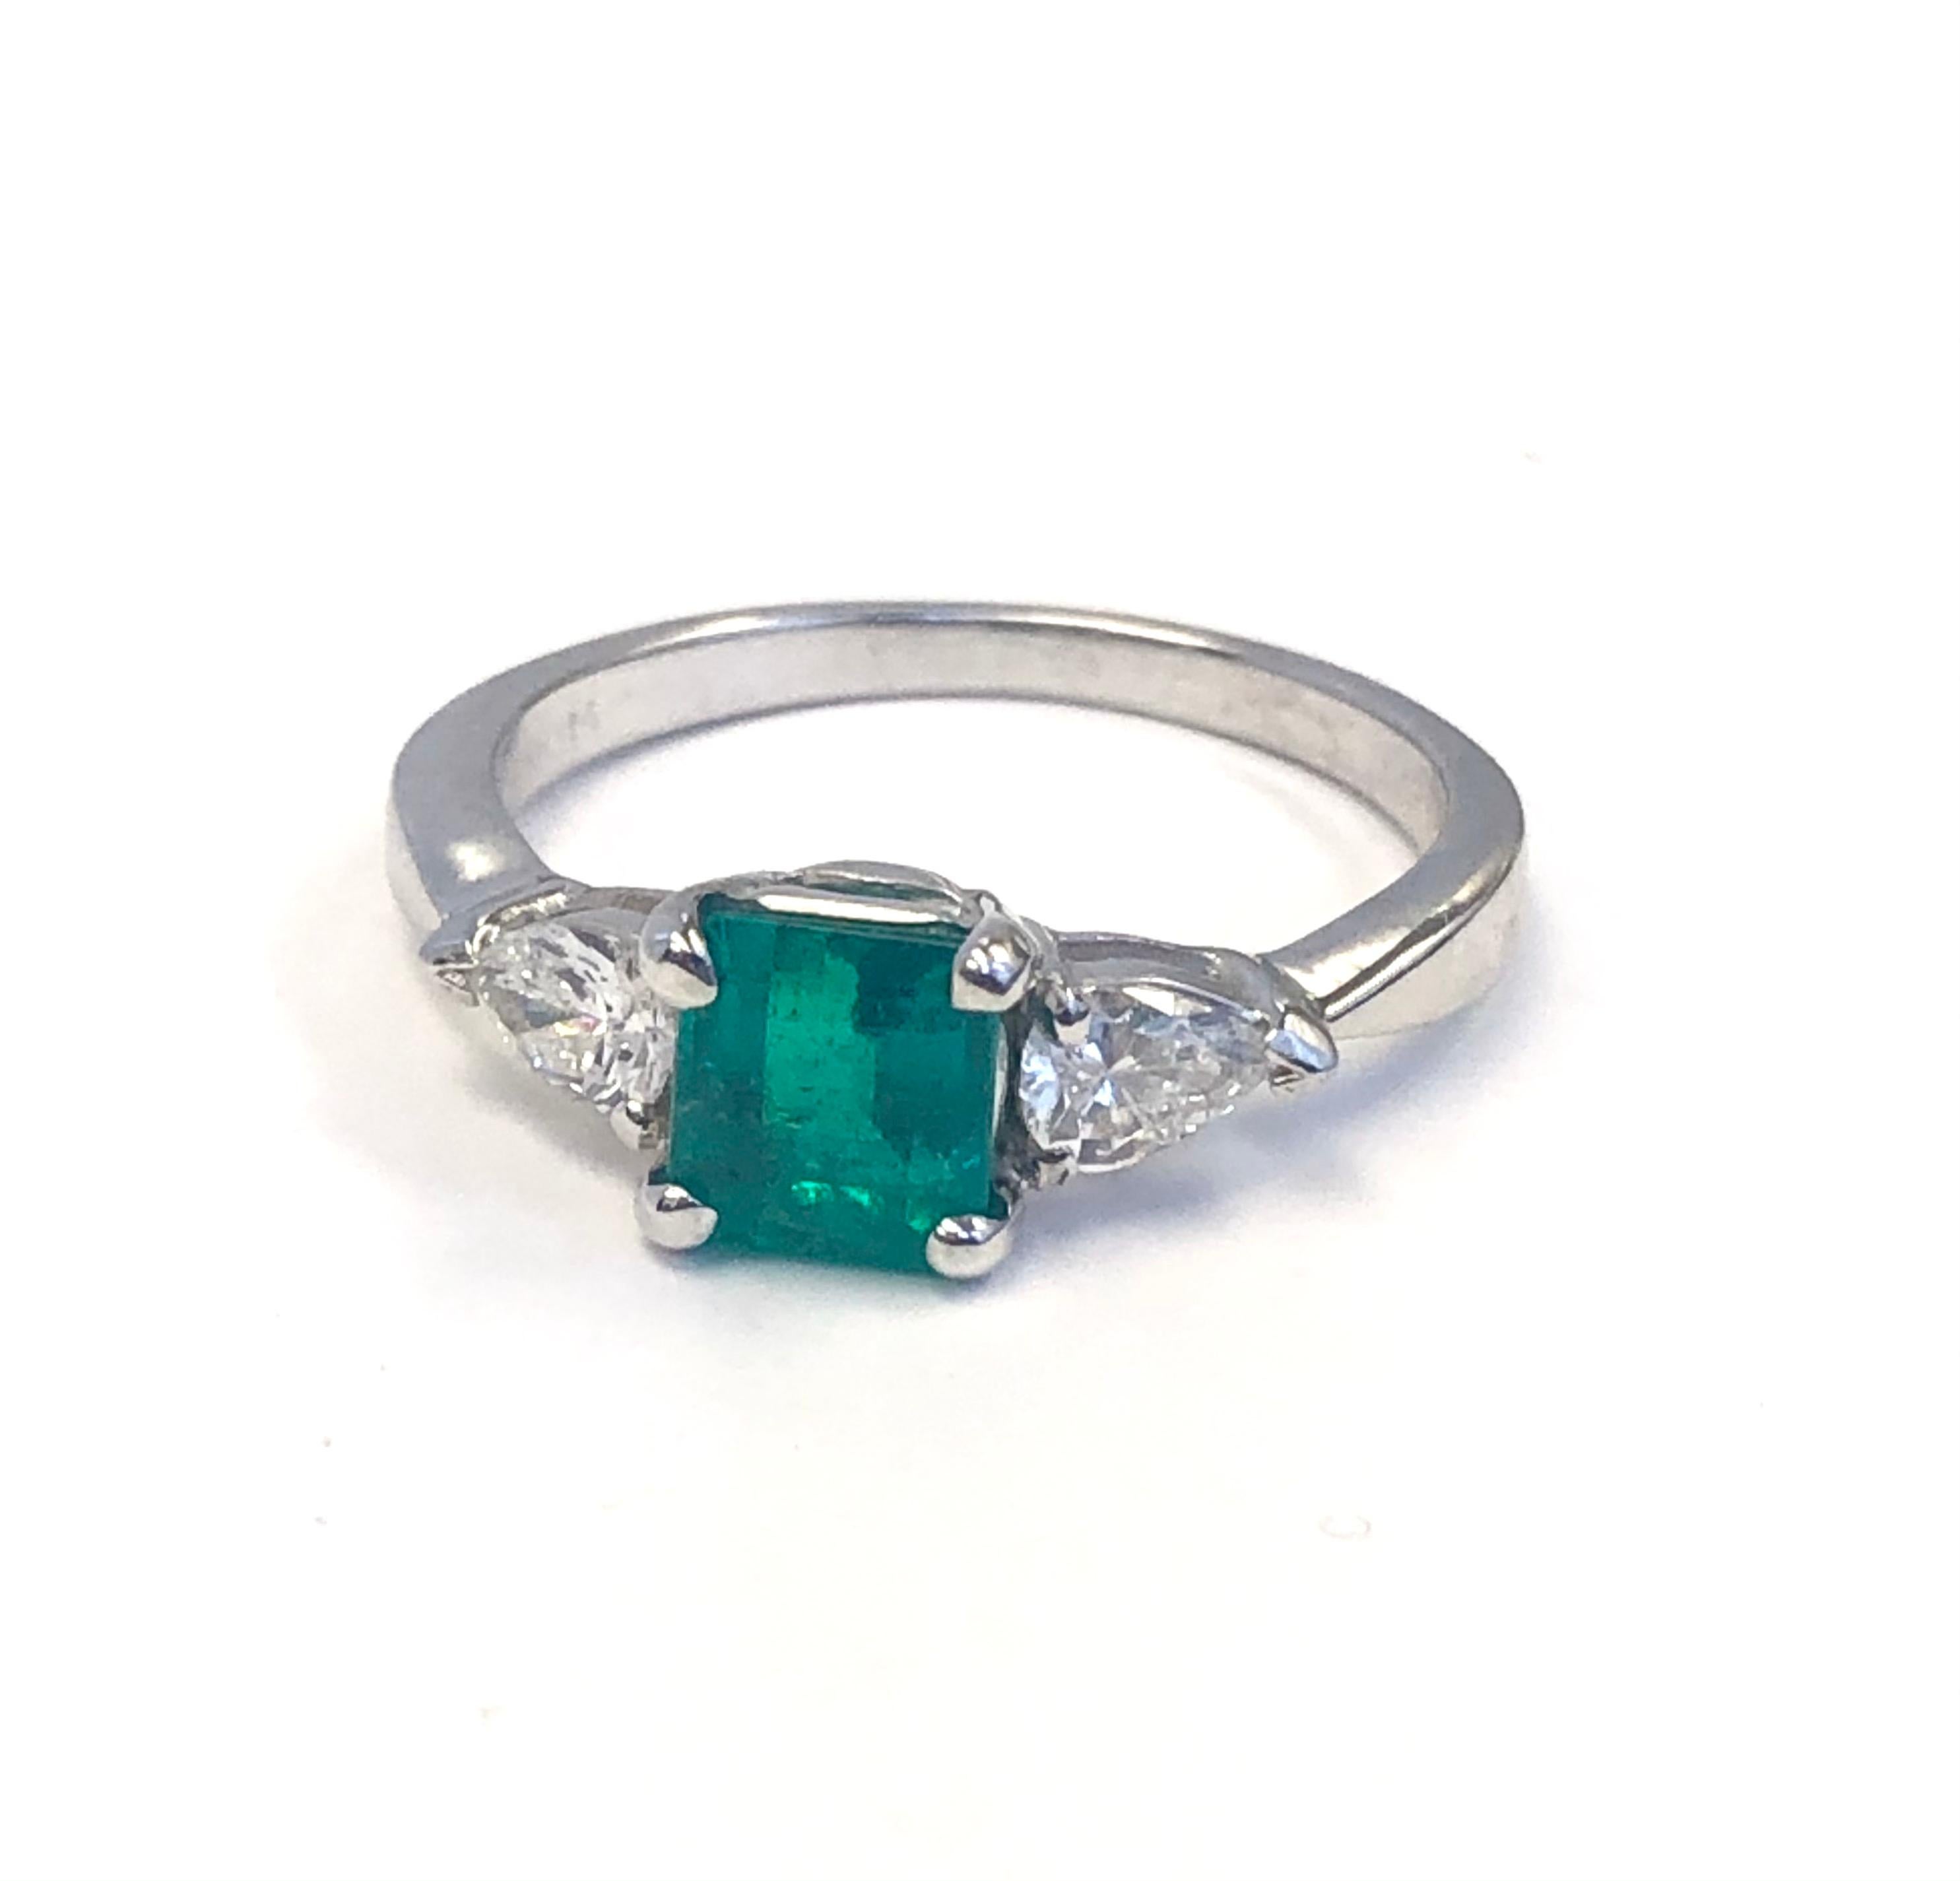 Estate Ring in great condition, made in Platinum, set with two Pear shape Diamonds 0.50 carats and an Emerald Cut Emerald 1.01 carats. Ring size now is a 7, it can be made to your size easily. 